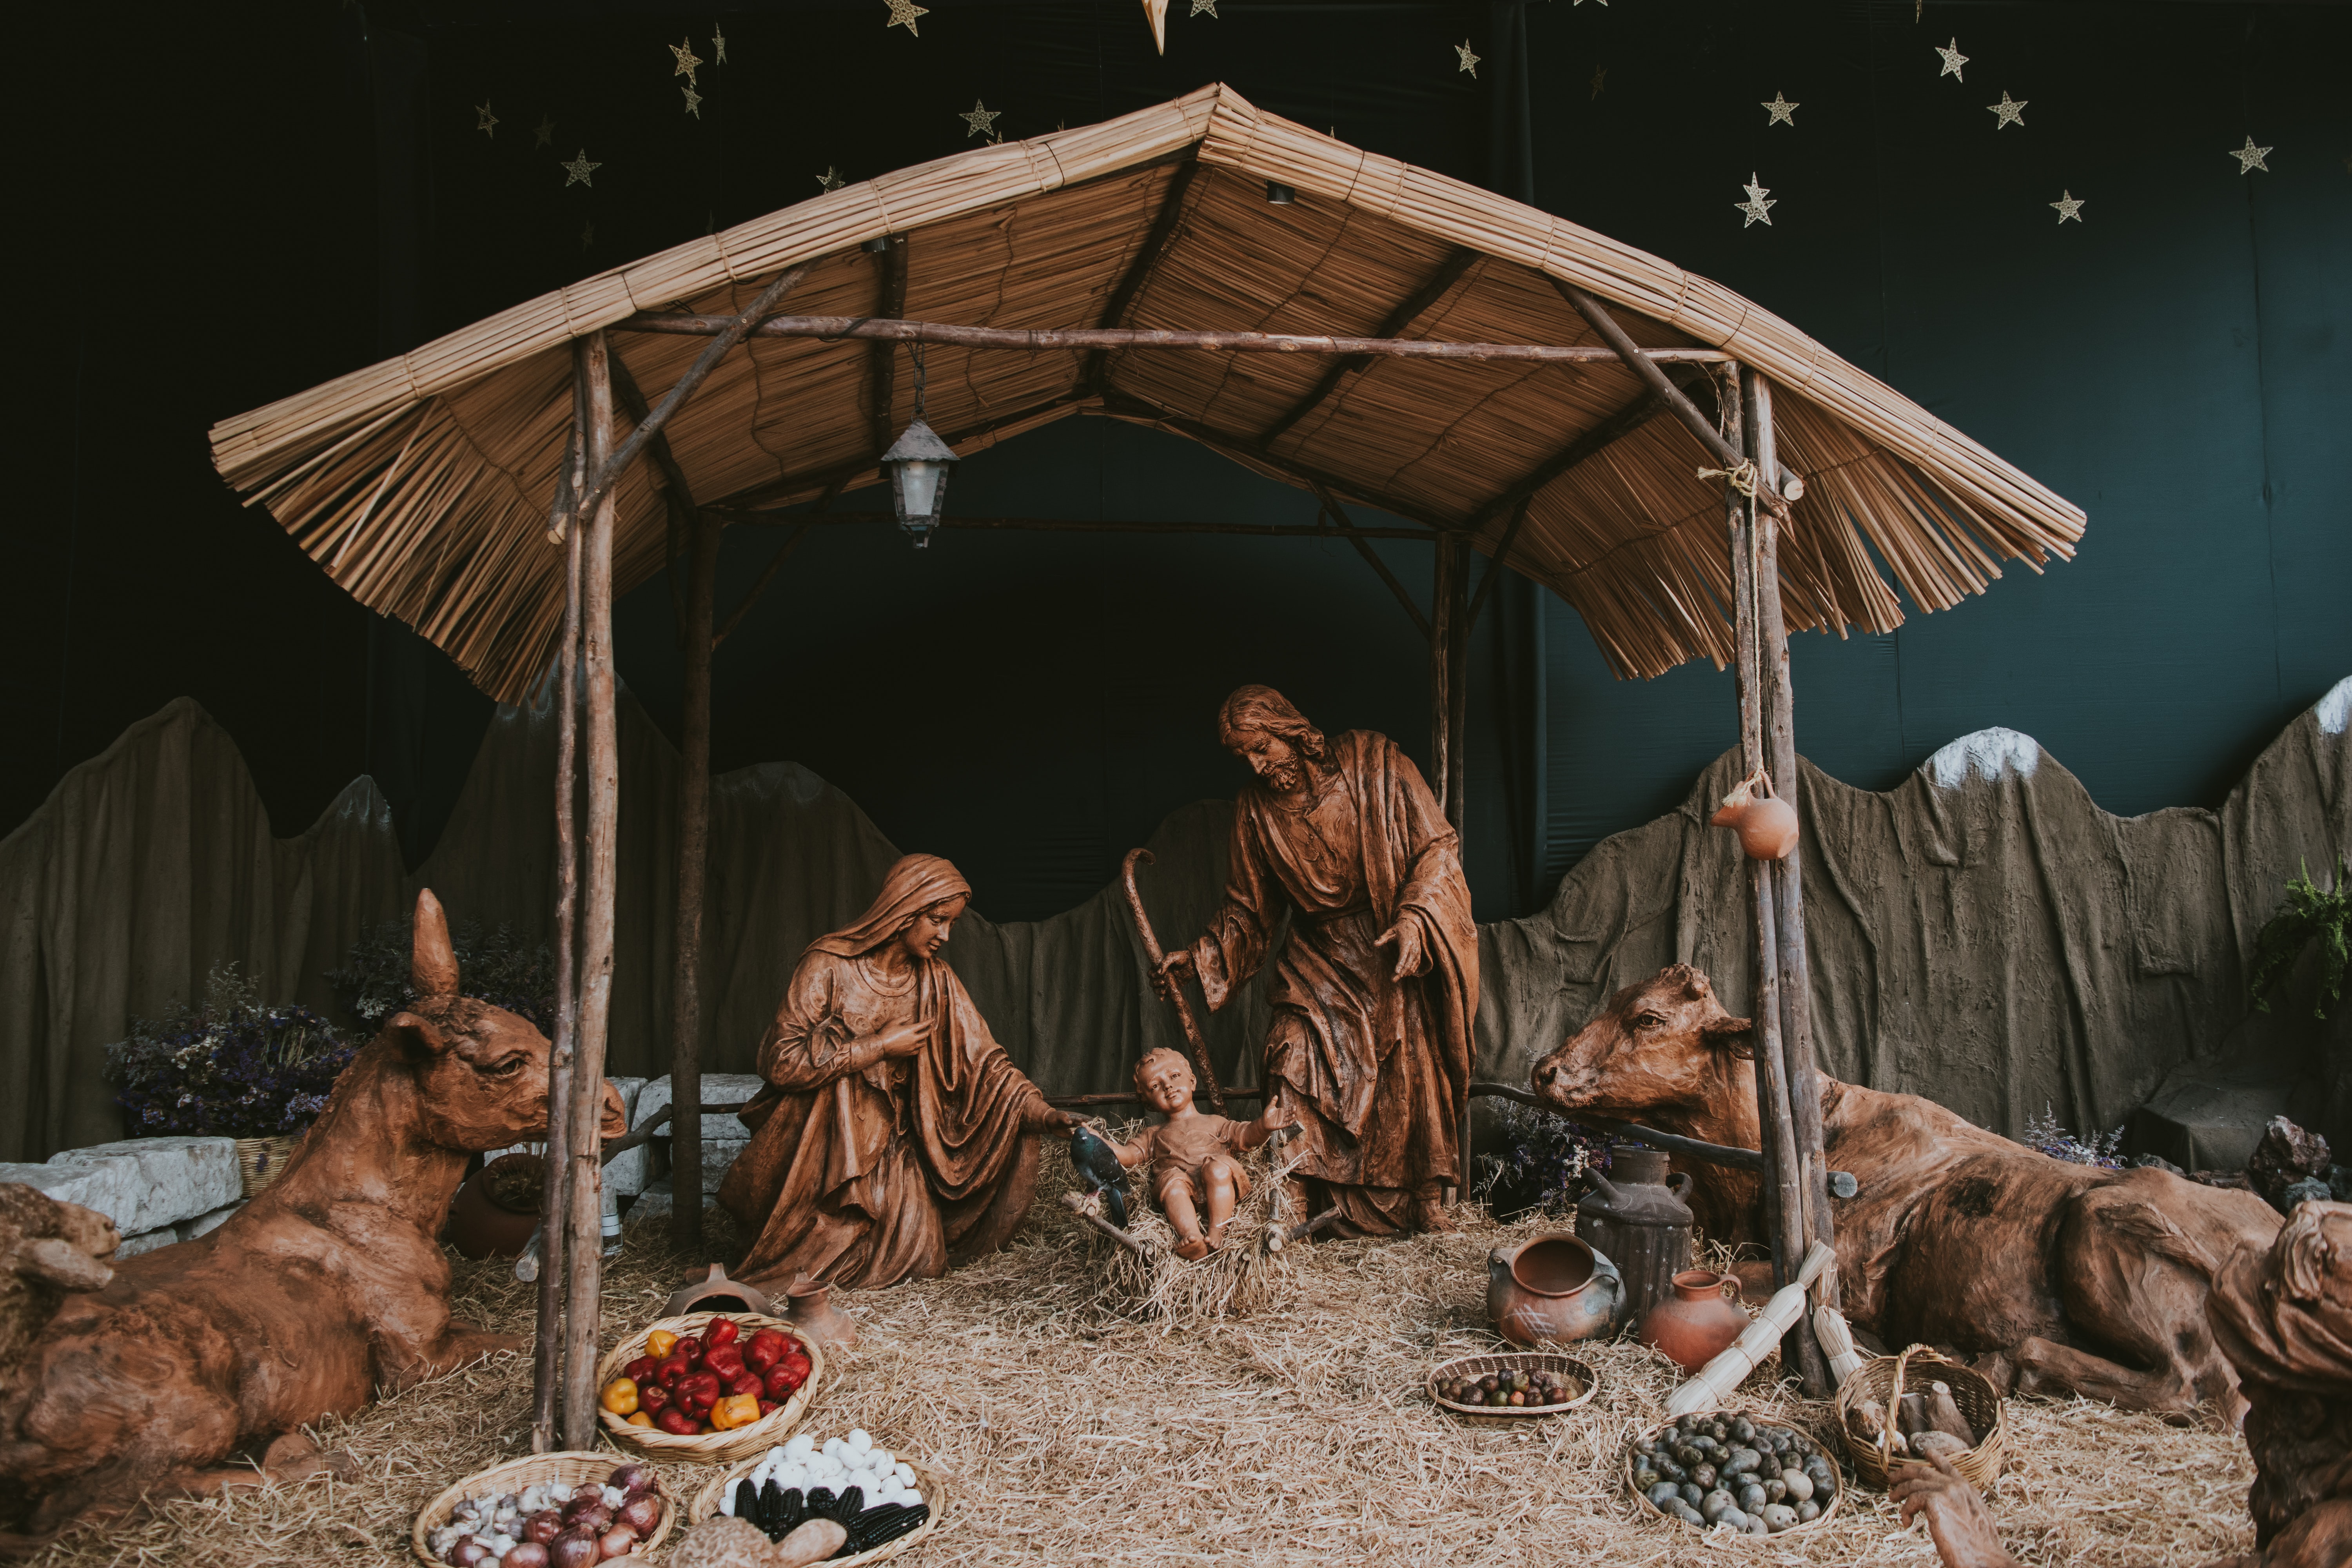 nativity scene, baby jesus in a manger, wooden figurines and animals